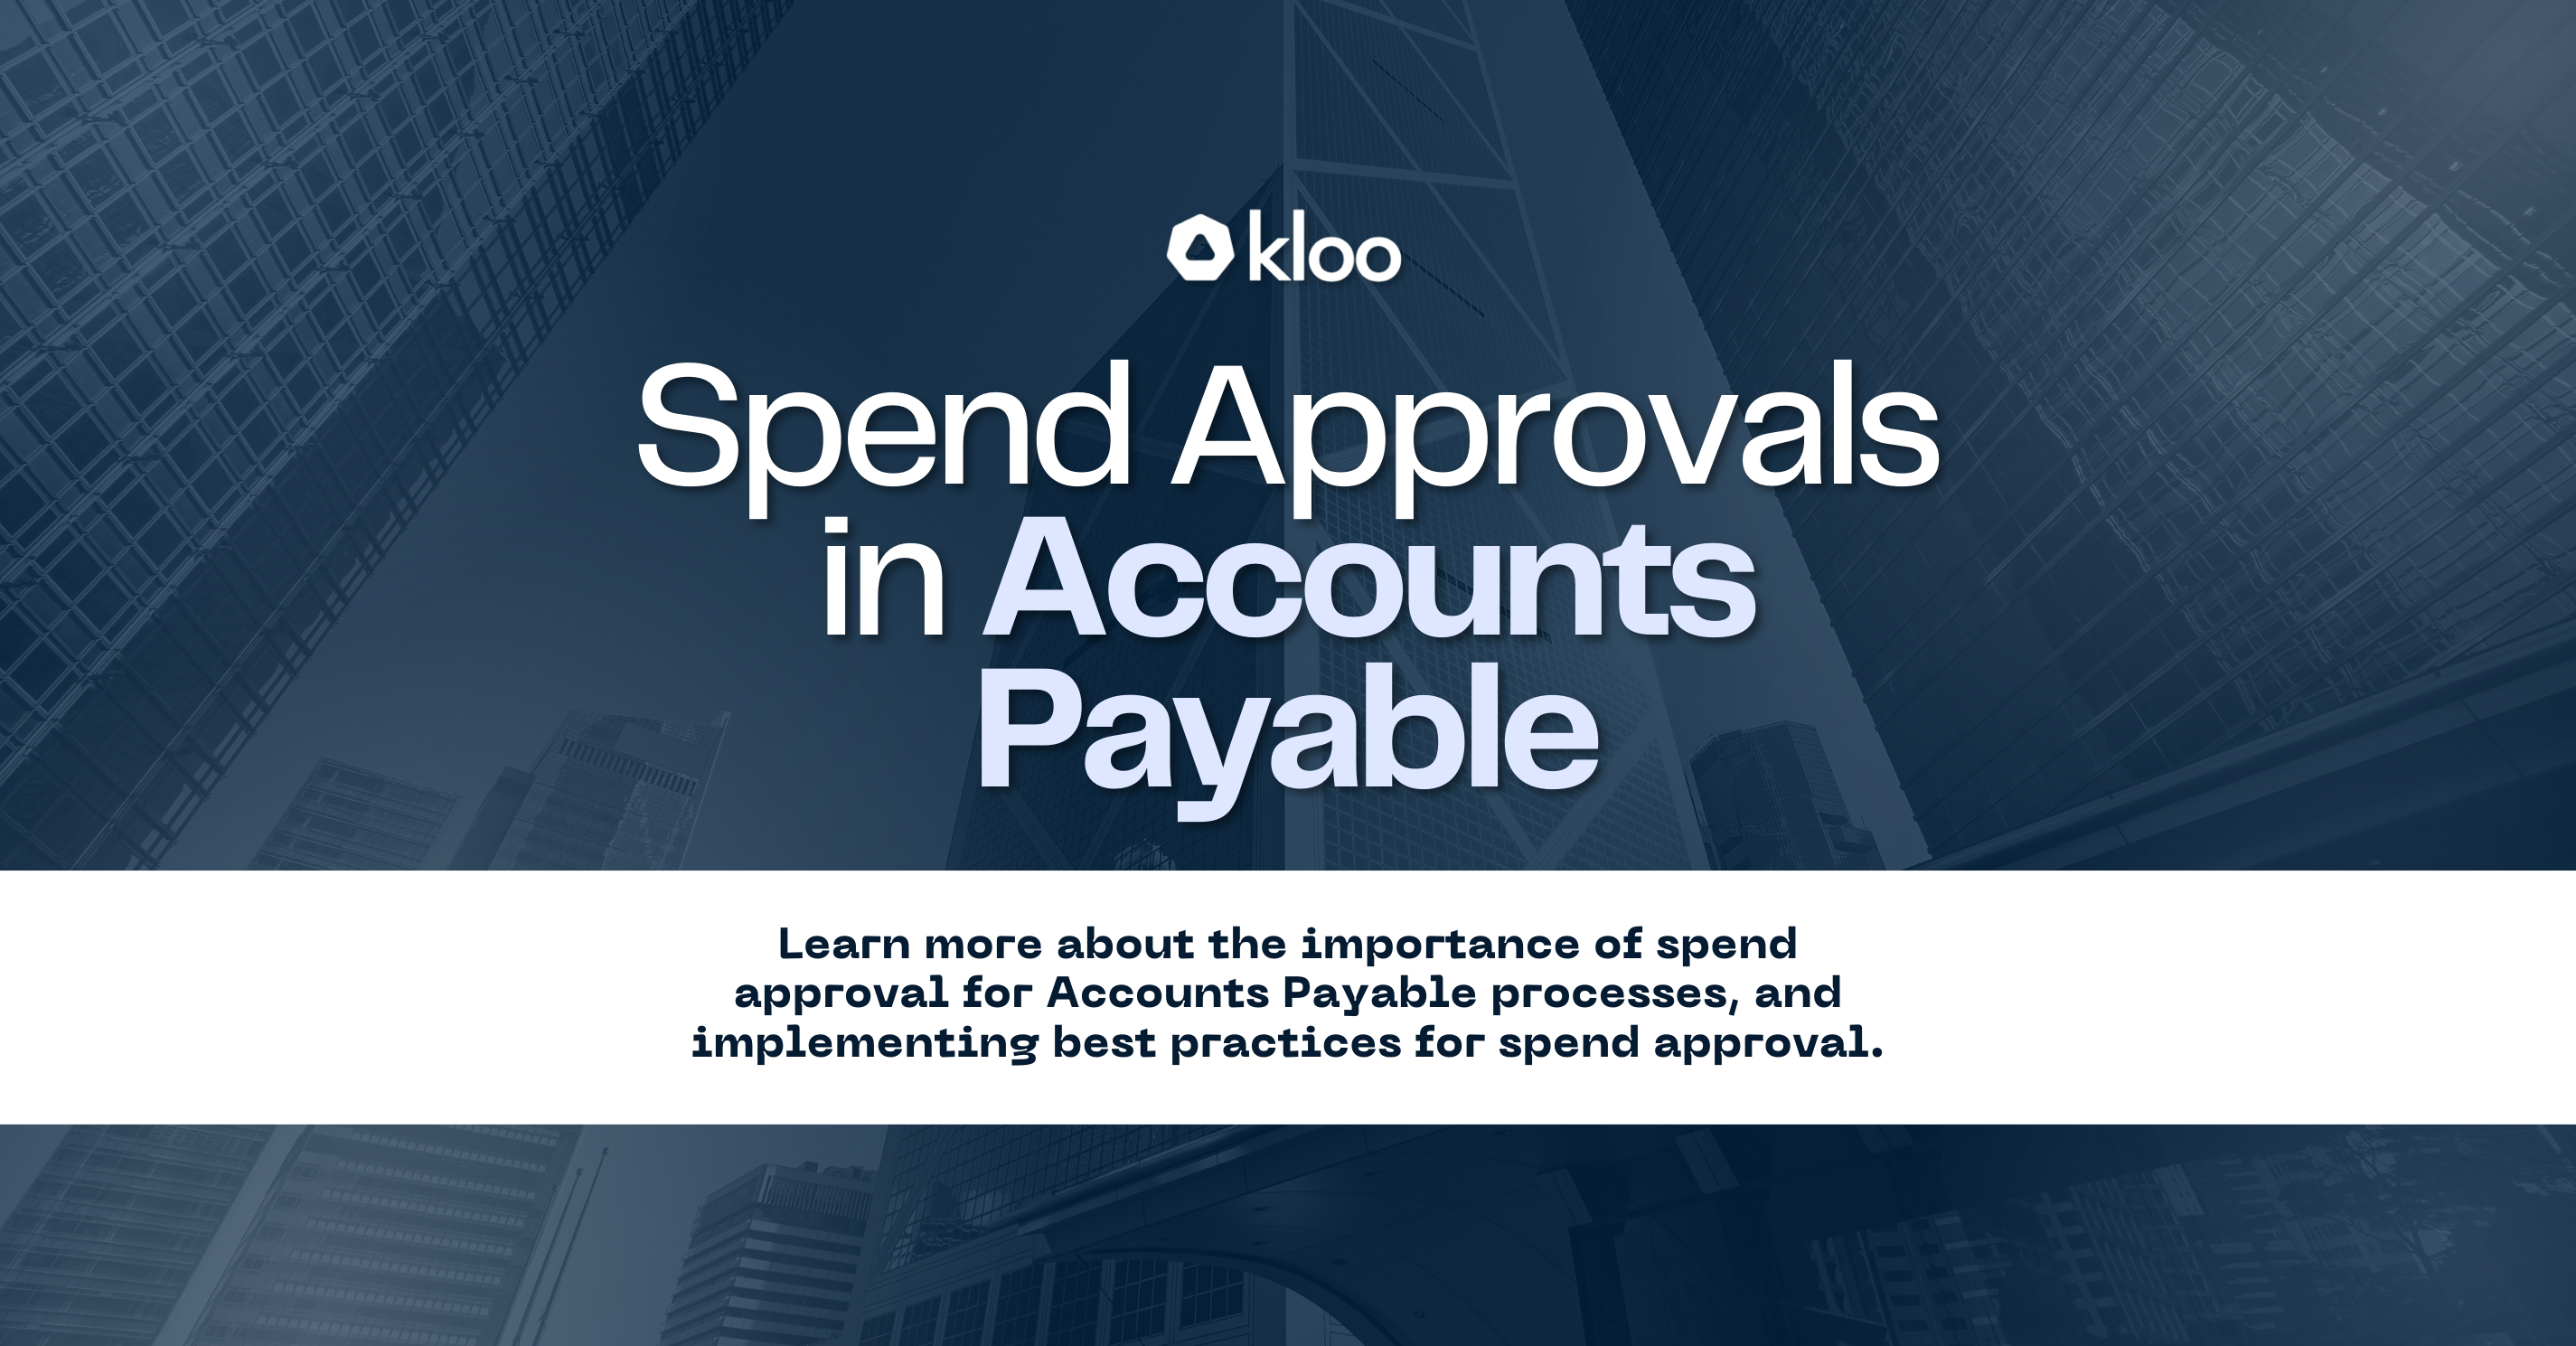 The importance of spend approvals in financial management